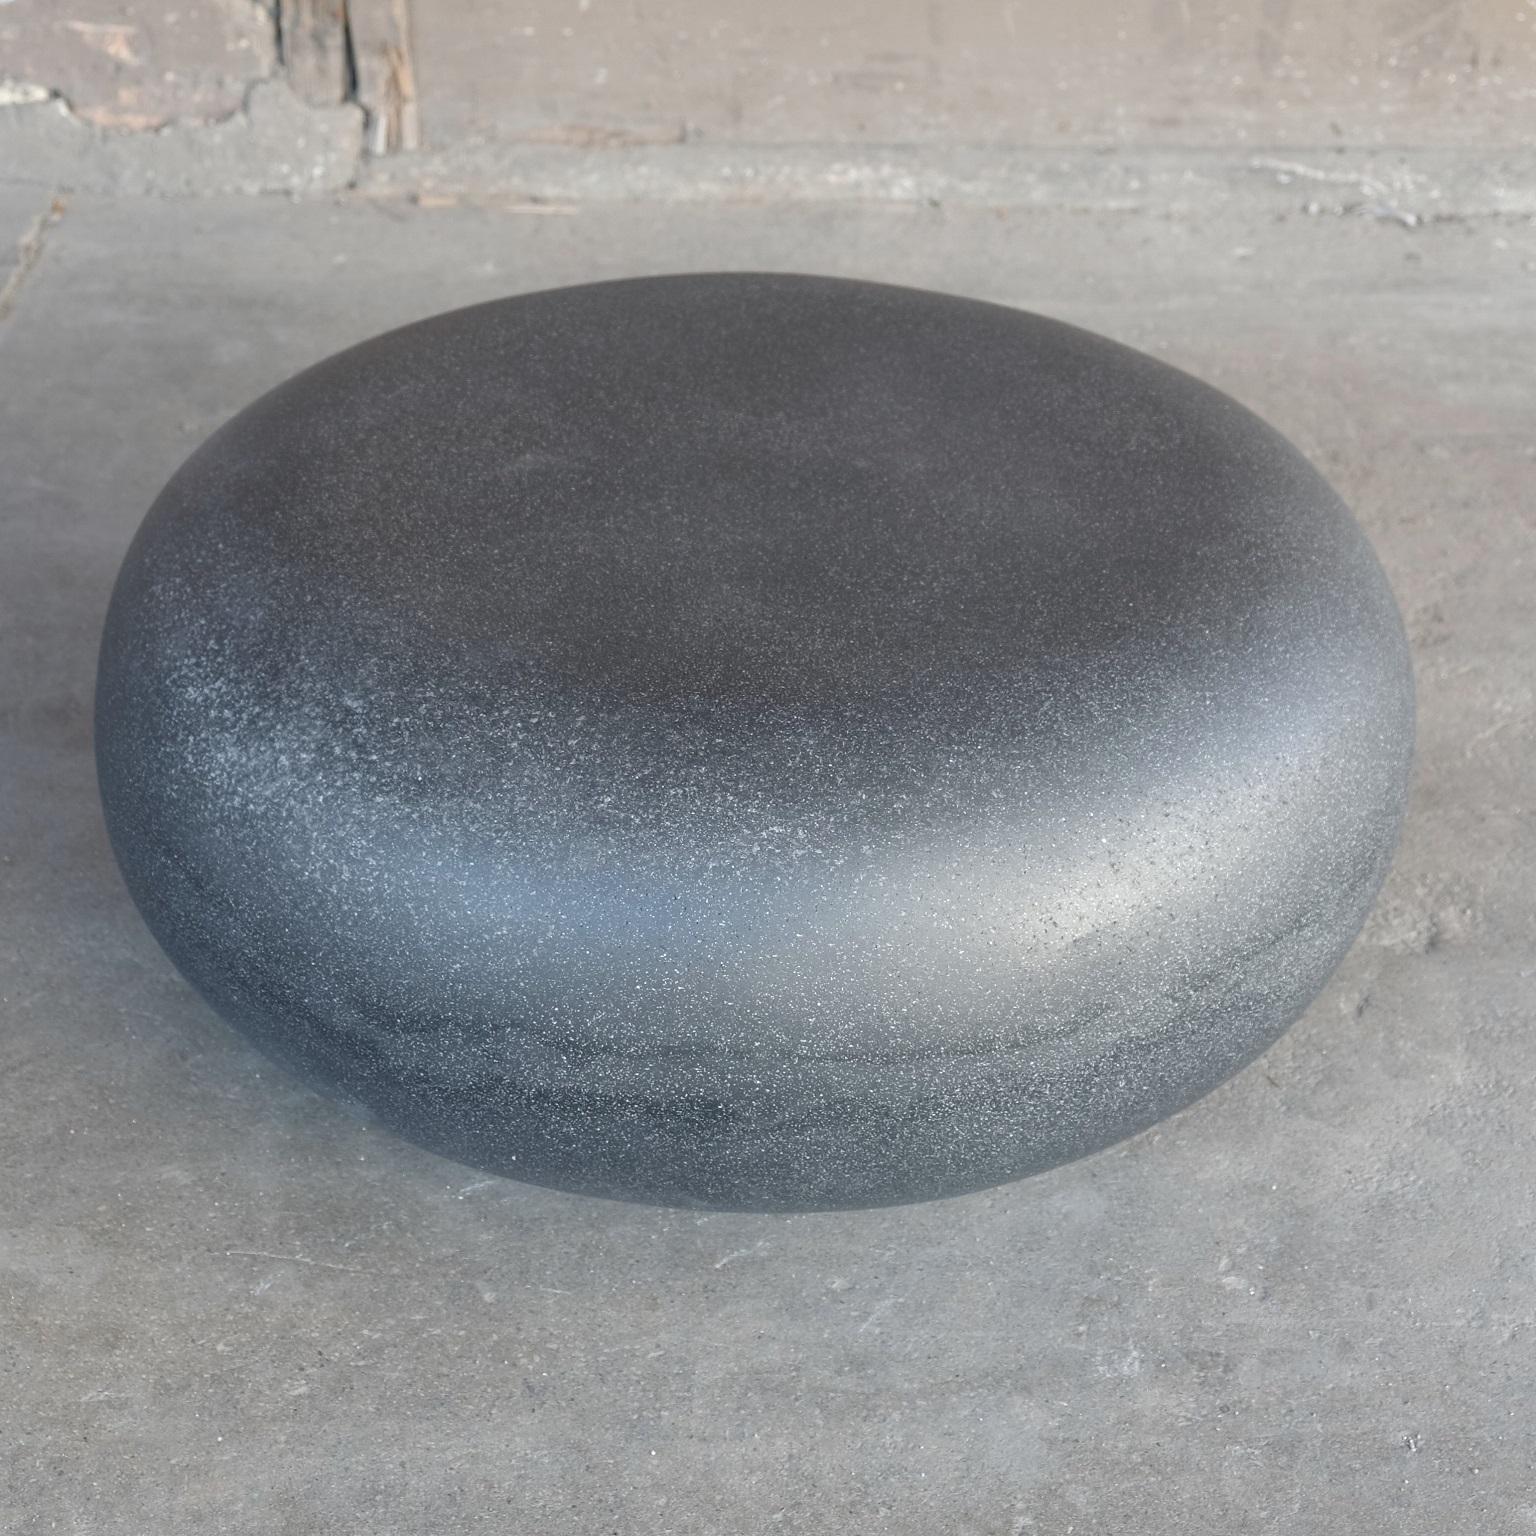 Like a stone from a stream, smoothed for millennia by the passing currents. The fluid potential of natural power emanates from its presence.

Dimensions: Diameter 36 in. (91 cm), height 15 in. (38 cm). Weight 30 lbs. (14 kg).

Finish color